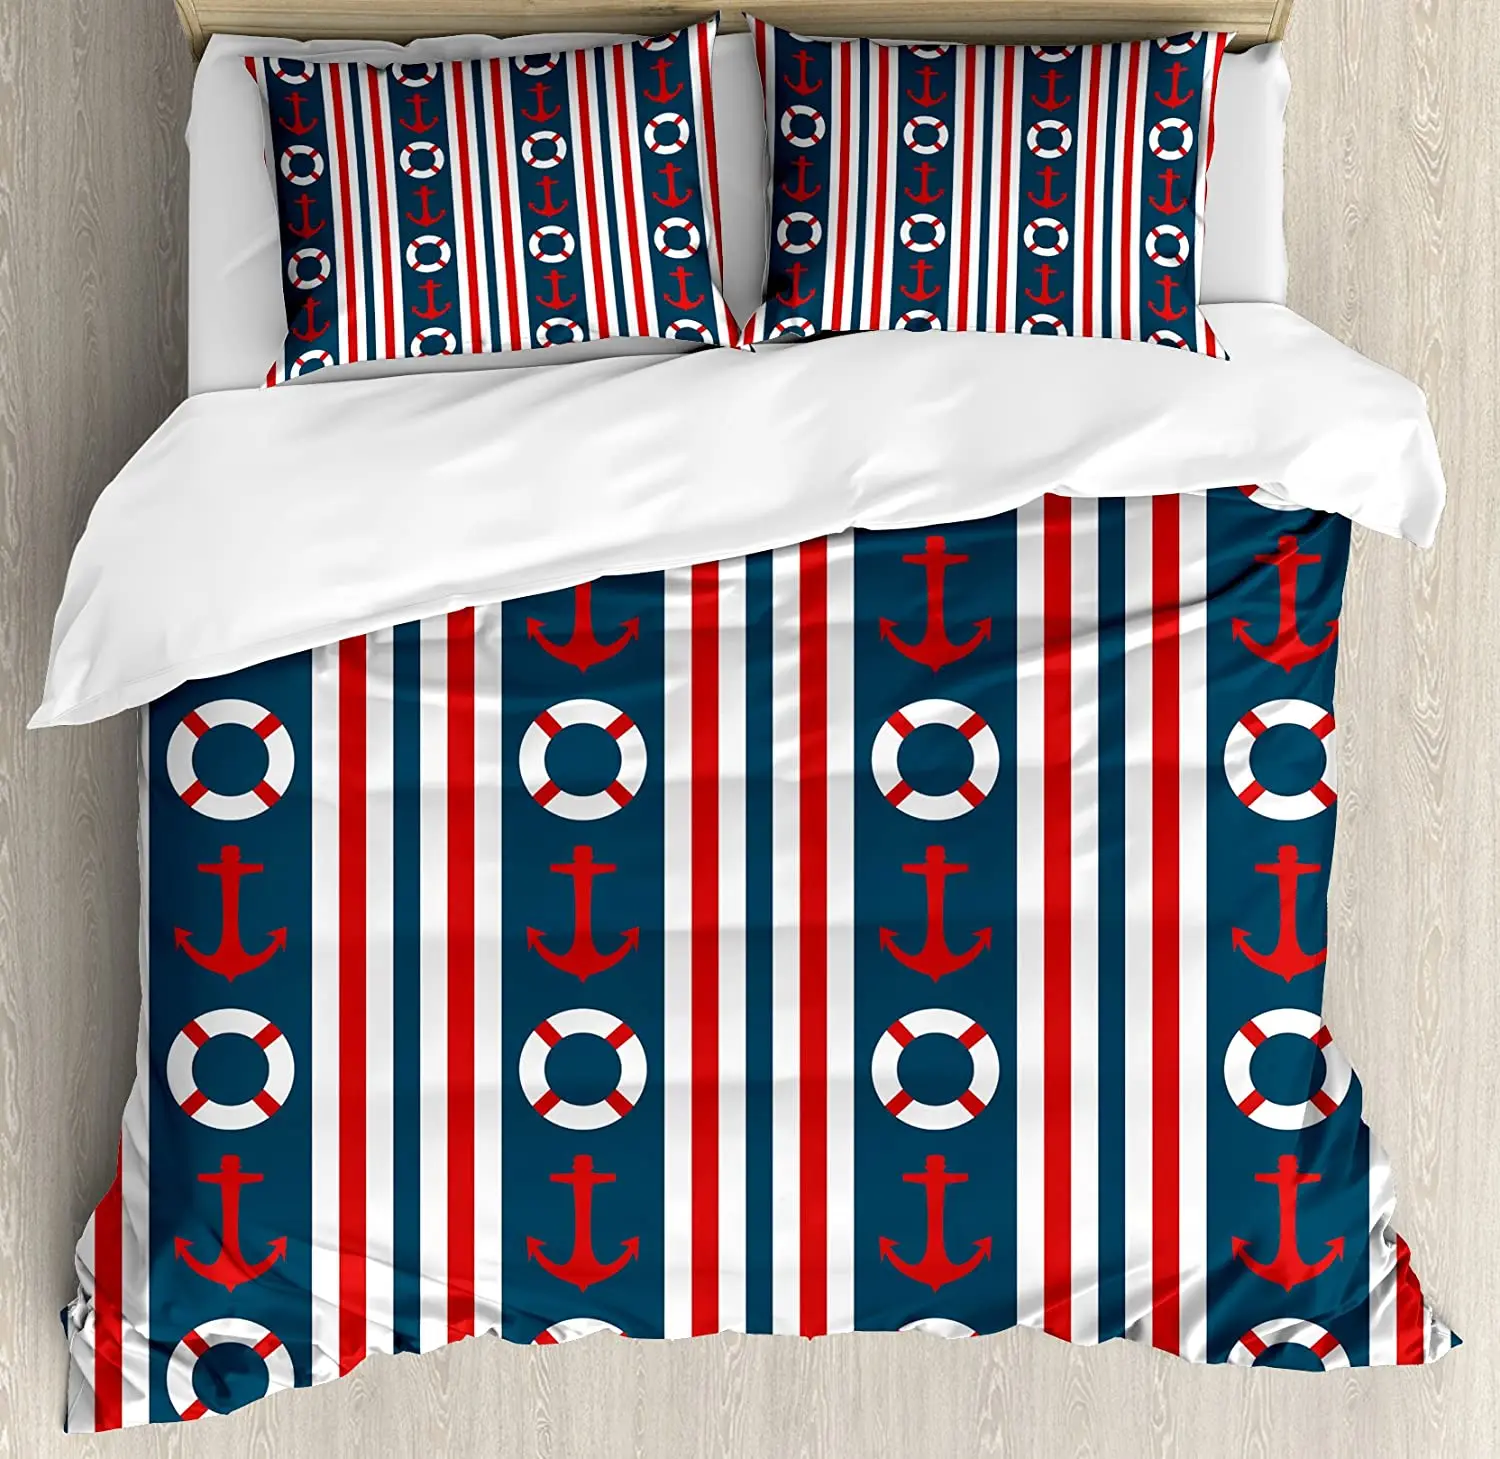 

Nautical Bedding Set For Bedroom Bed Home Vertical Borders Stripes Maritime Theme Steerin Duvet Cover Quilt Cover And Pillowcase